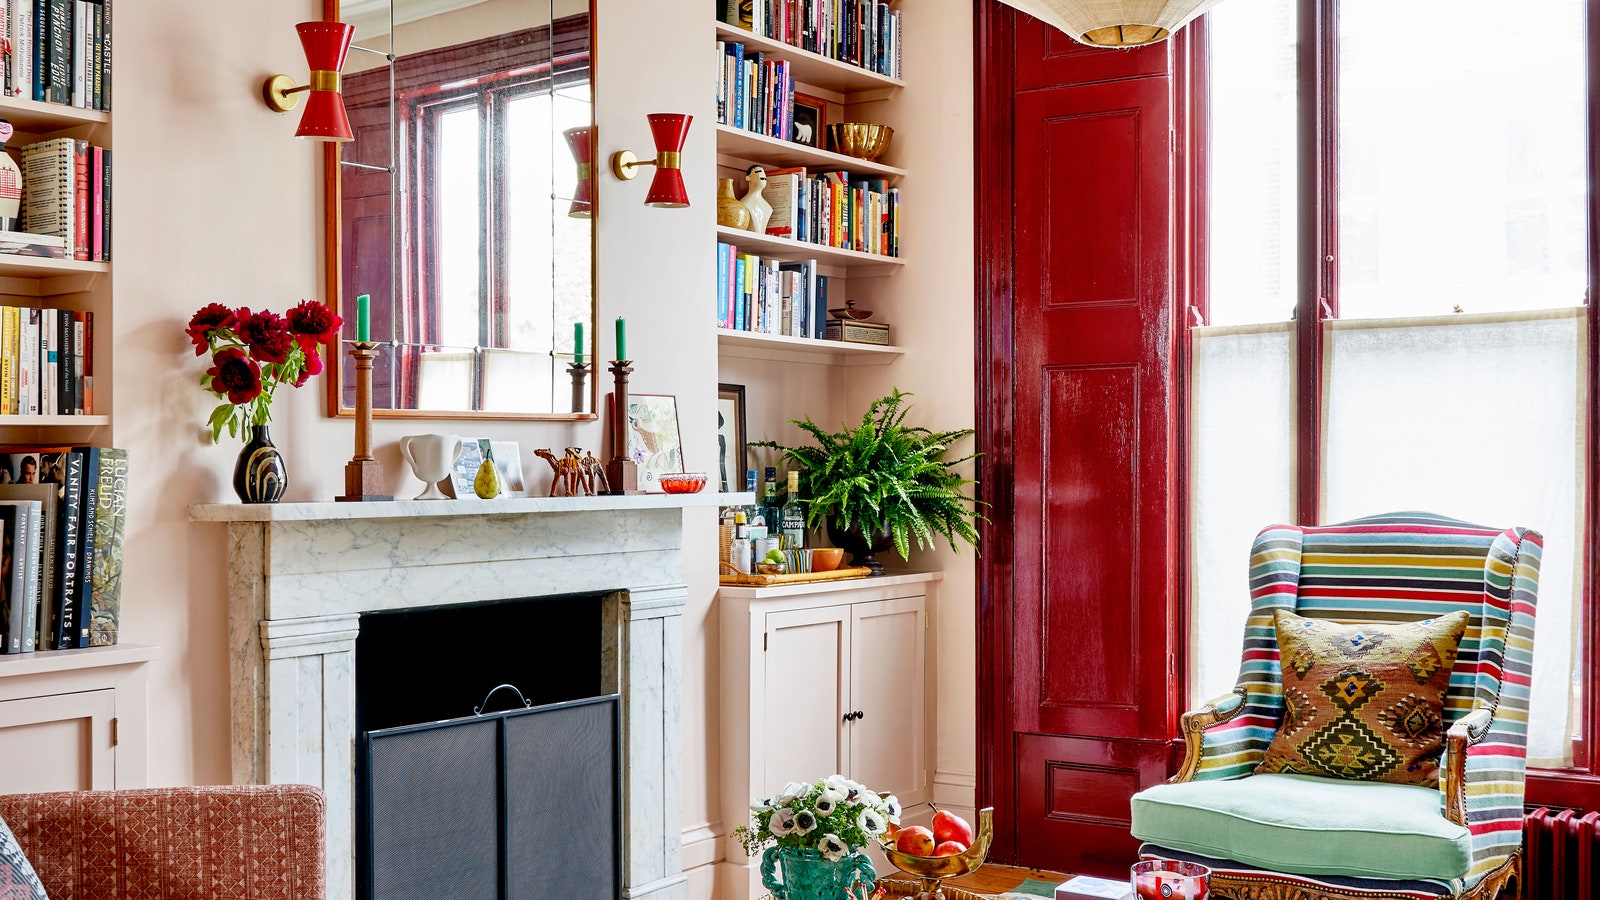 Lonika Chande brings cheerful colour and much-needed practicality to a family house in Stoke Newington